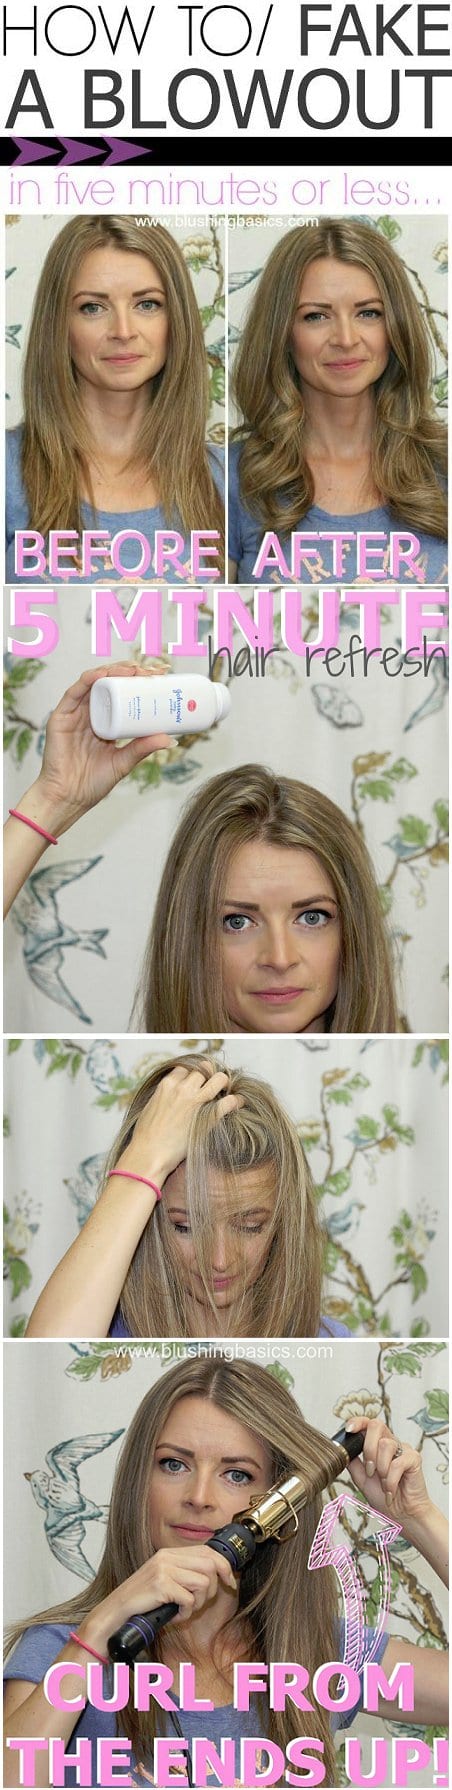 16 Very Useful Beauty Hacks Every Lazy Girl Must Know